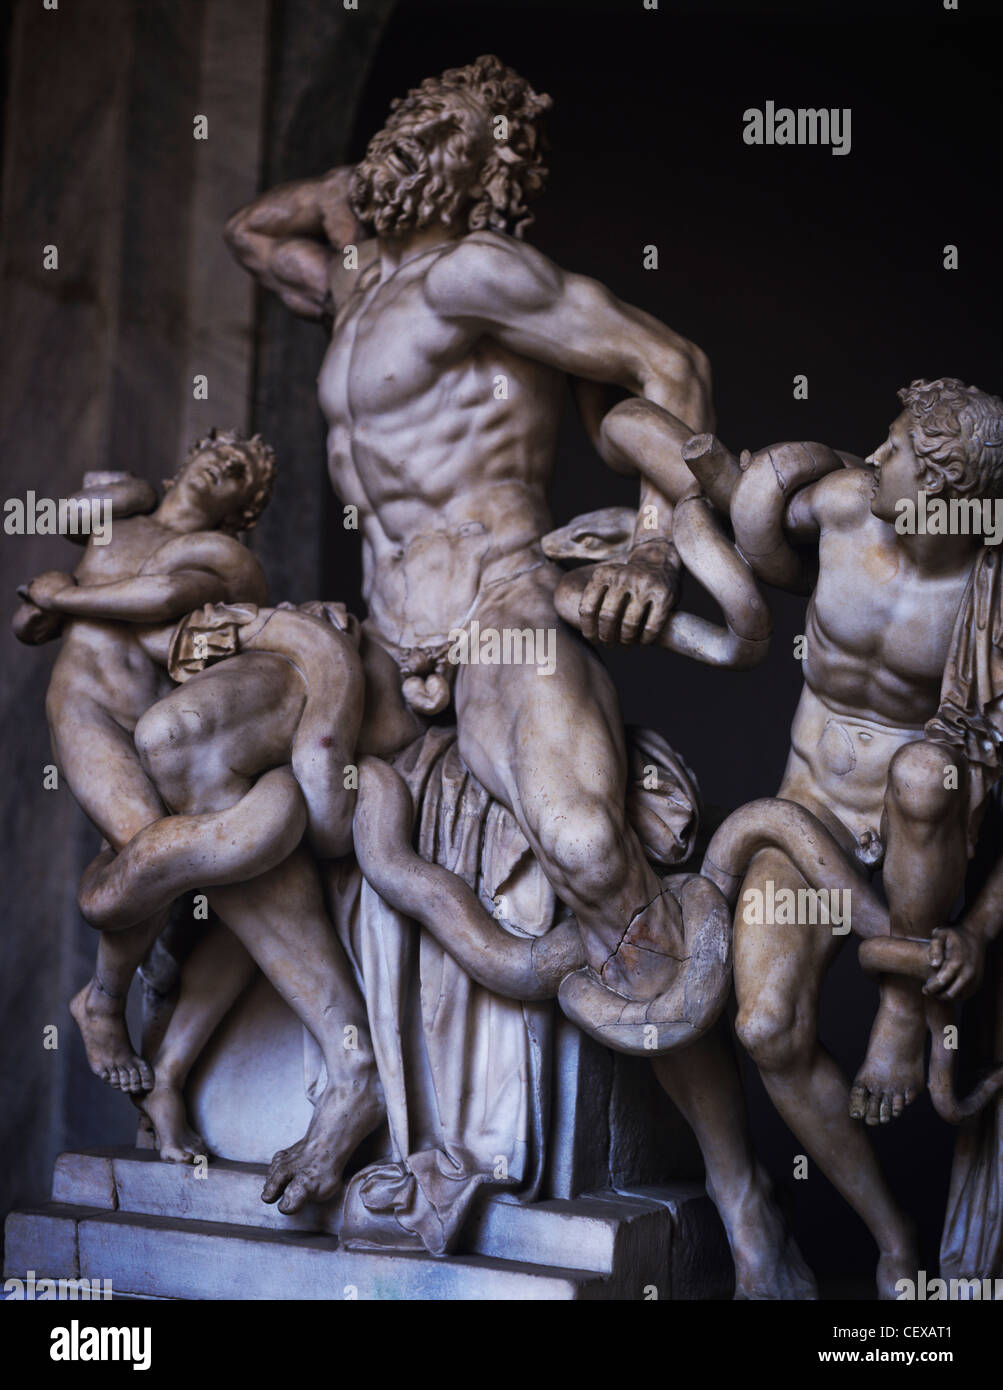 Sculpture of Laocoon and sons' death from snakes, Vatican Museum, Rome, Italy, Europe Stock Photo